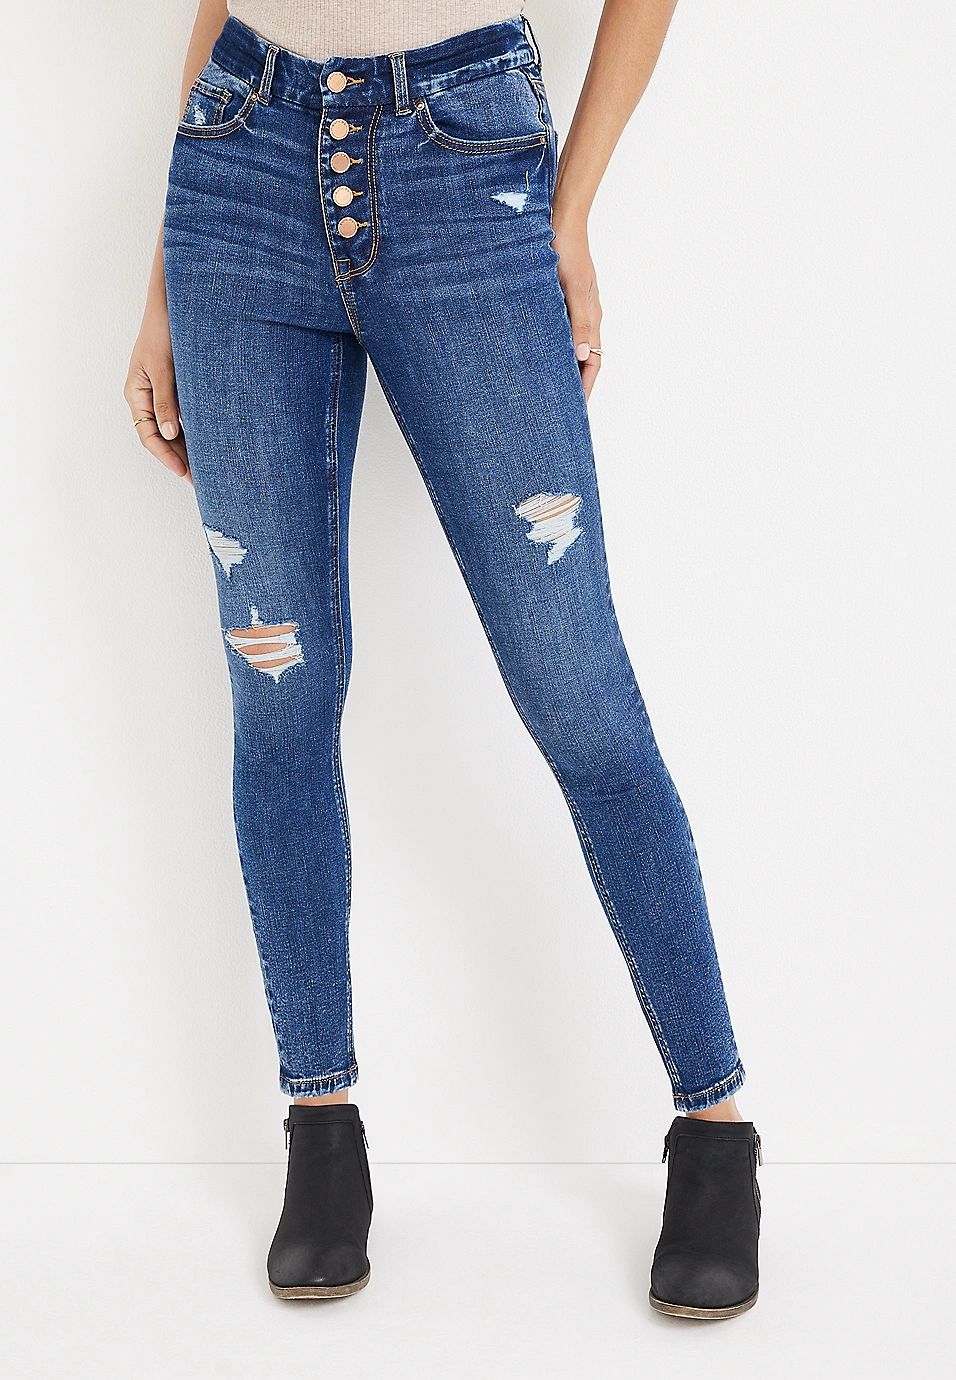 m jeans by maurices™ Limitless Button Fly High Rise Jegging | Maurices